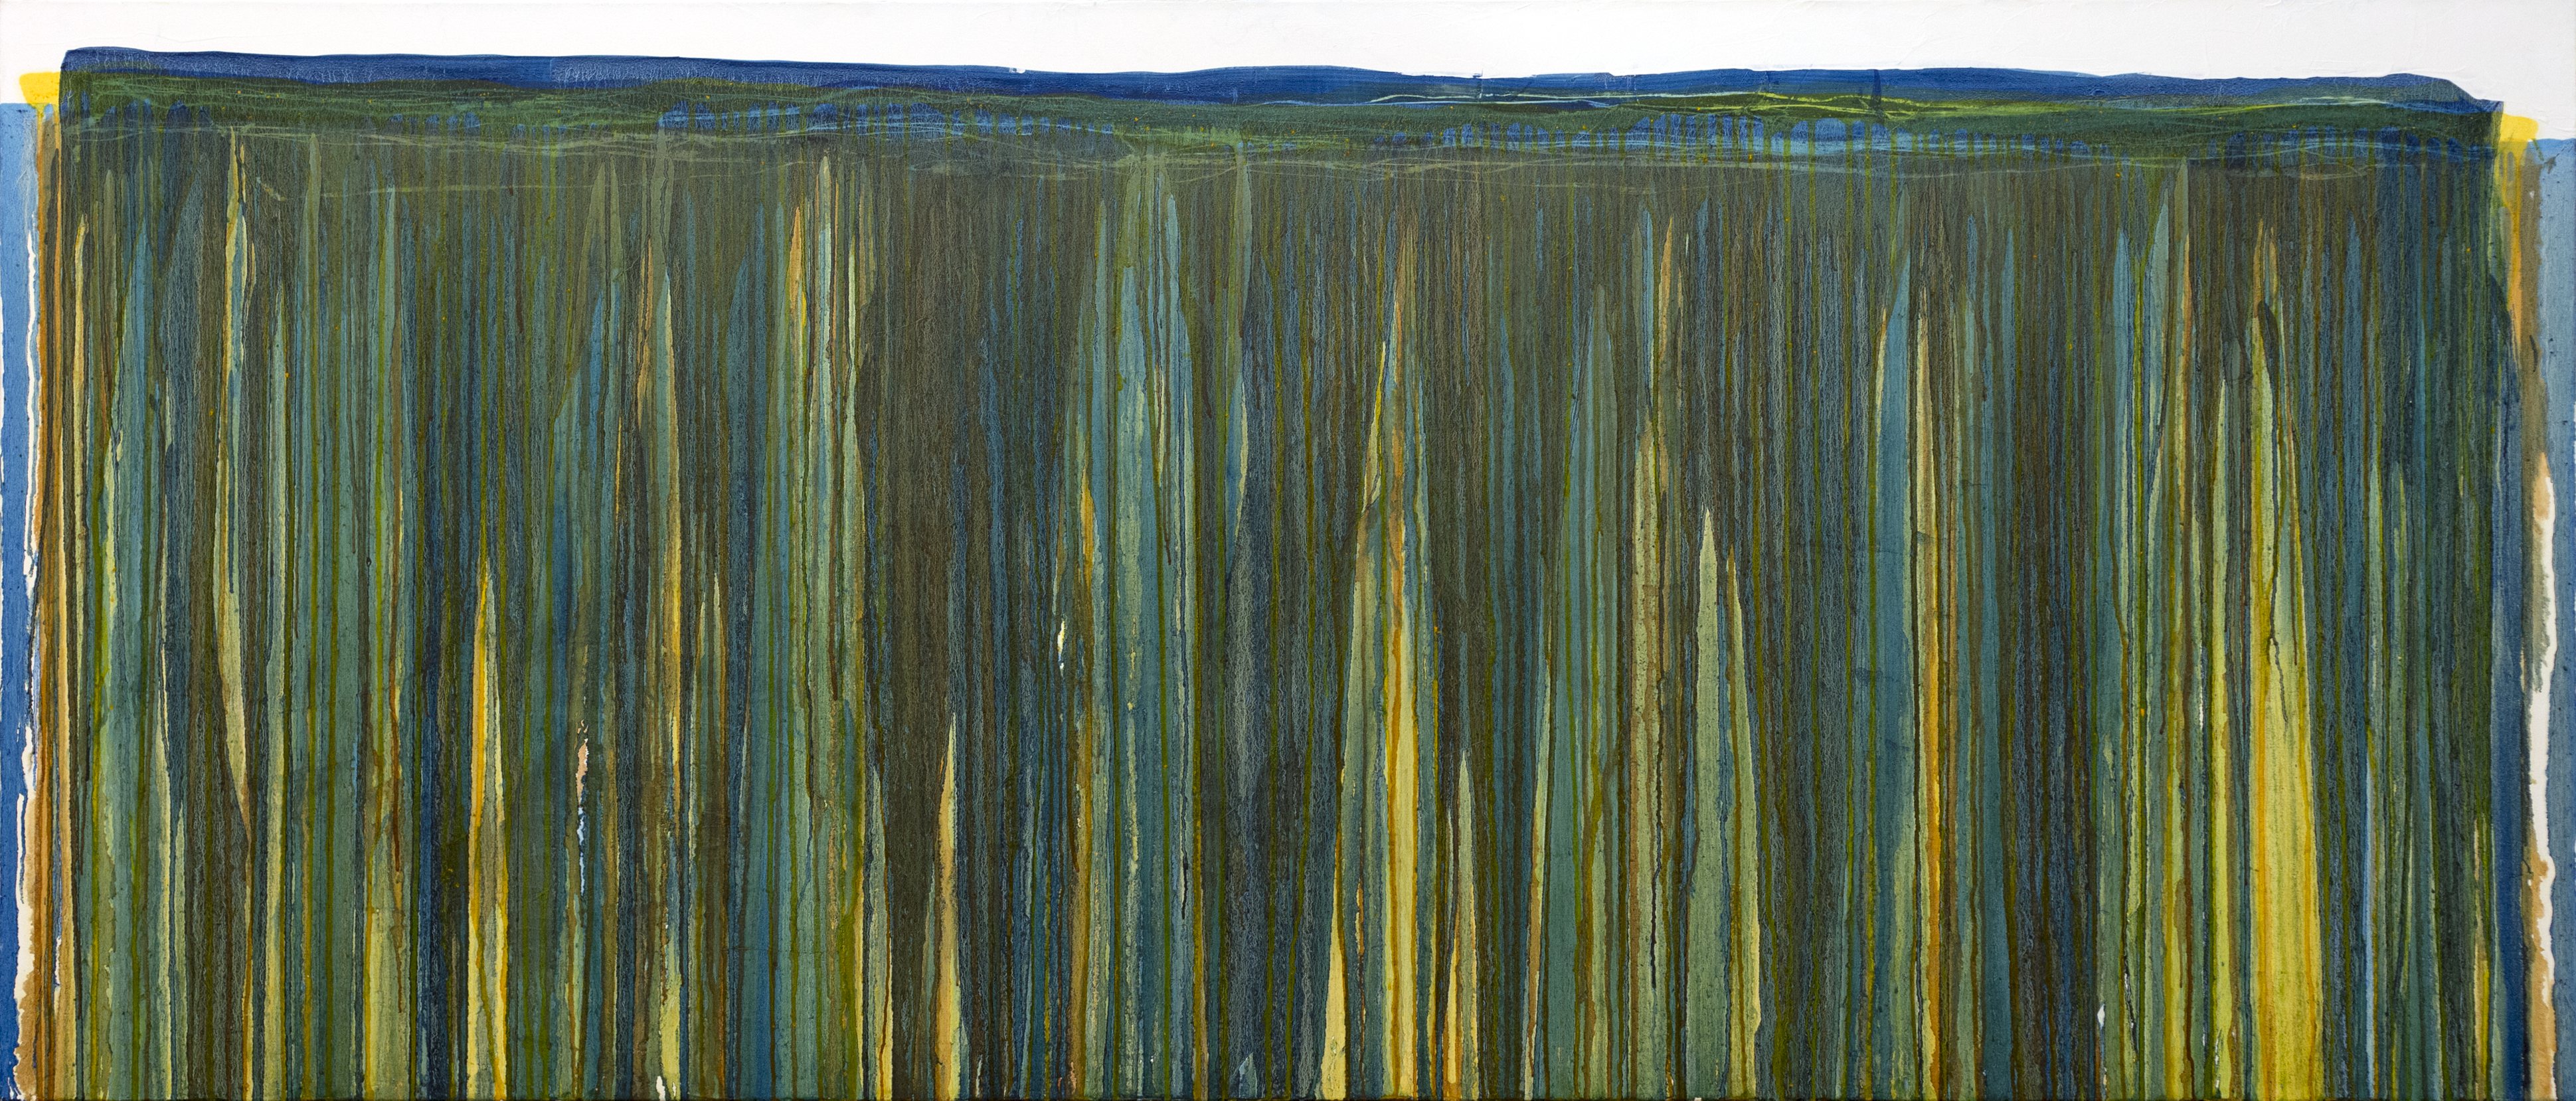 Reeds, oil on canvas